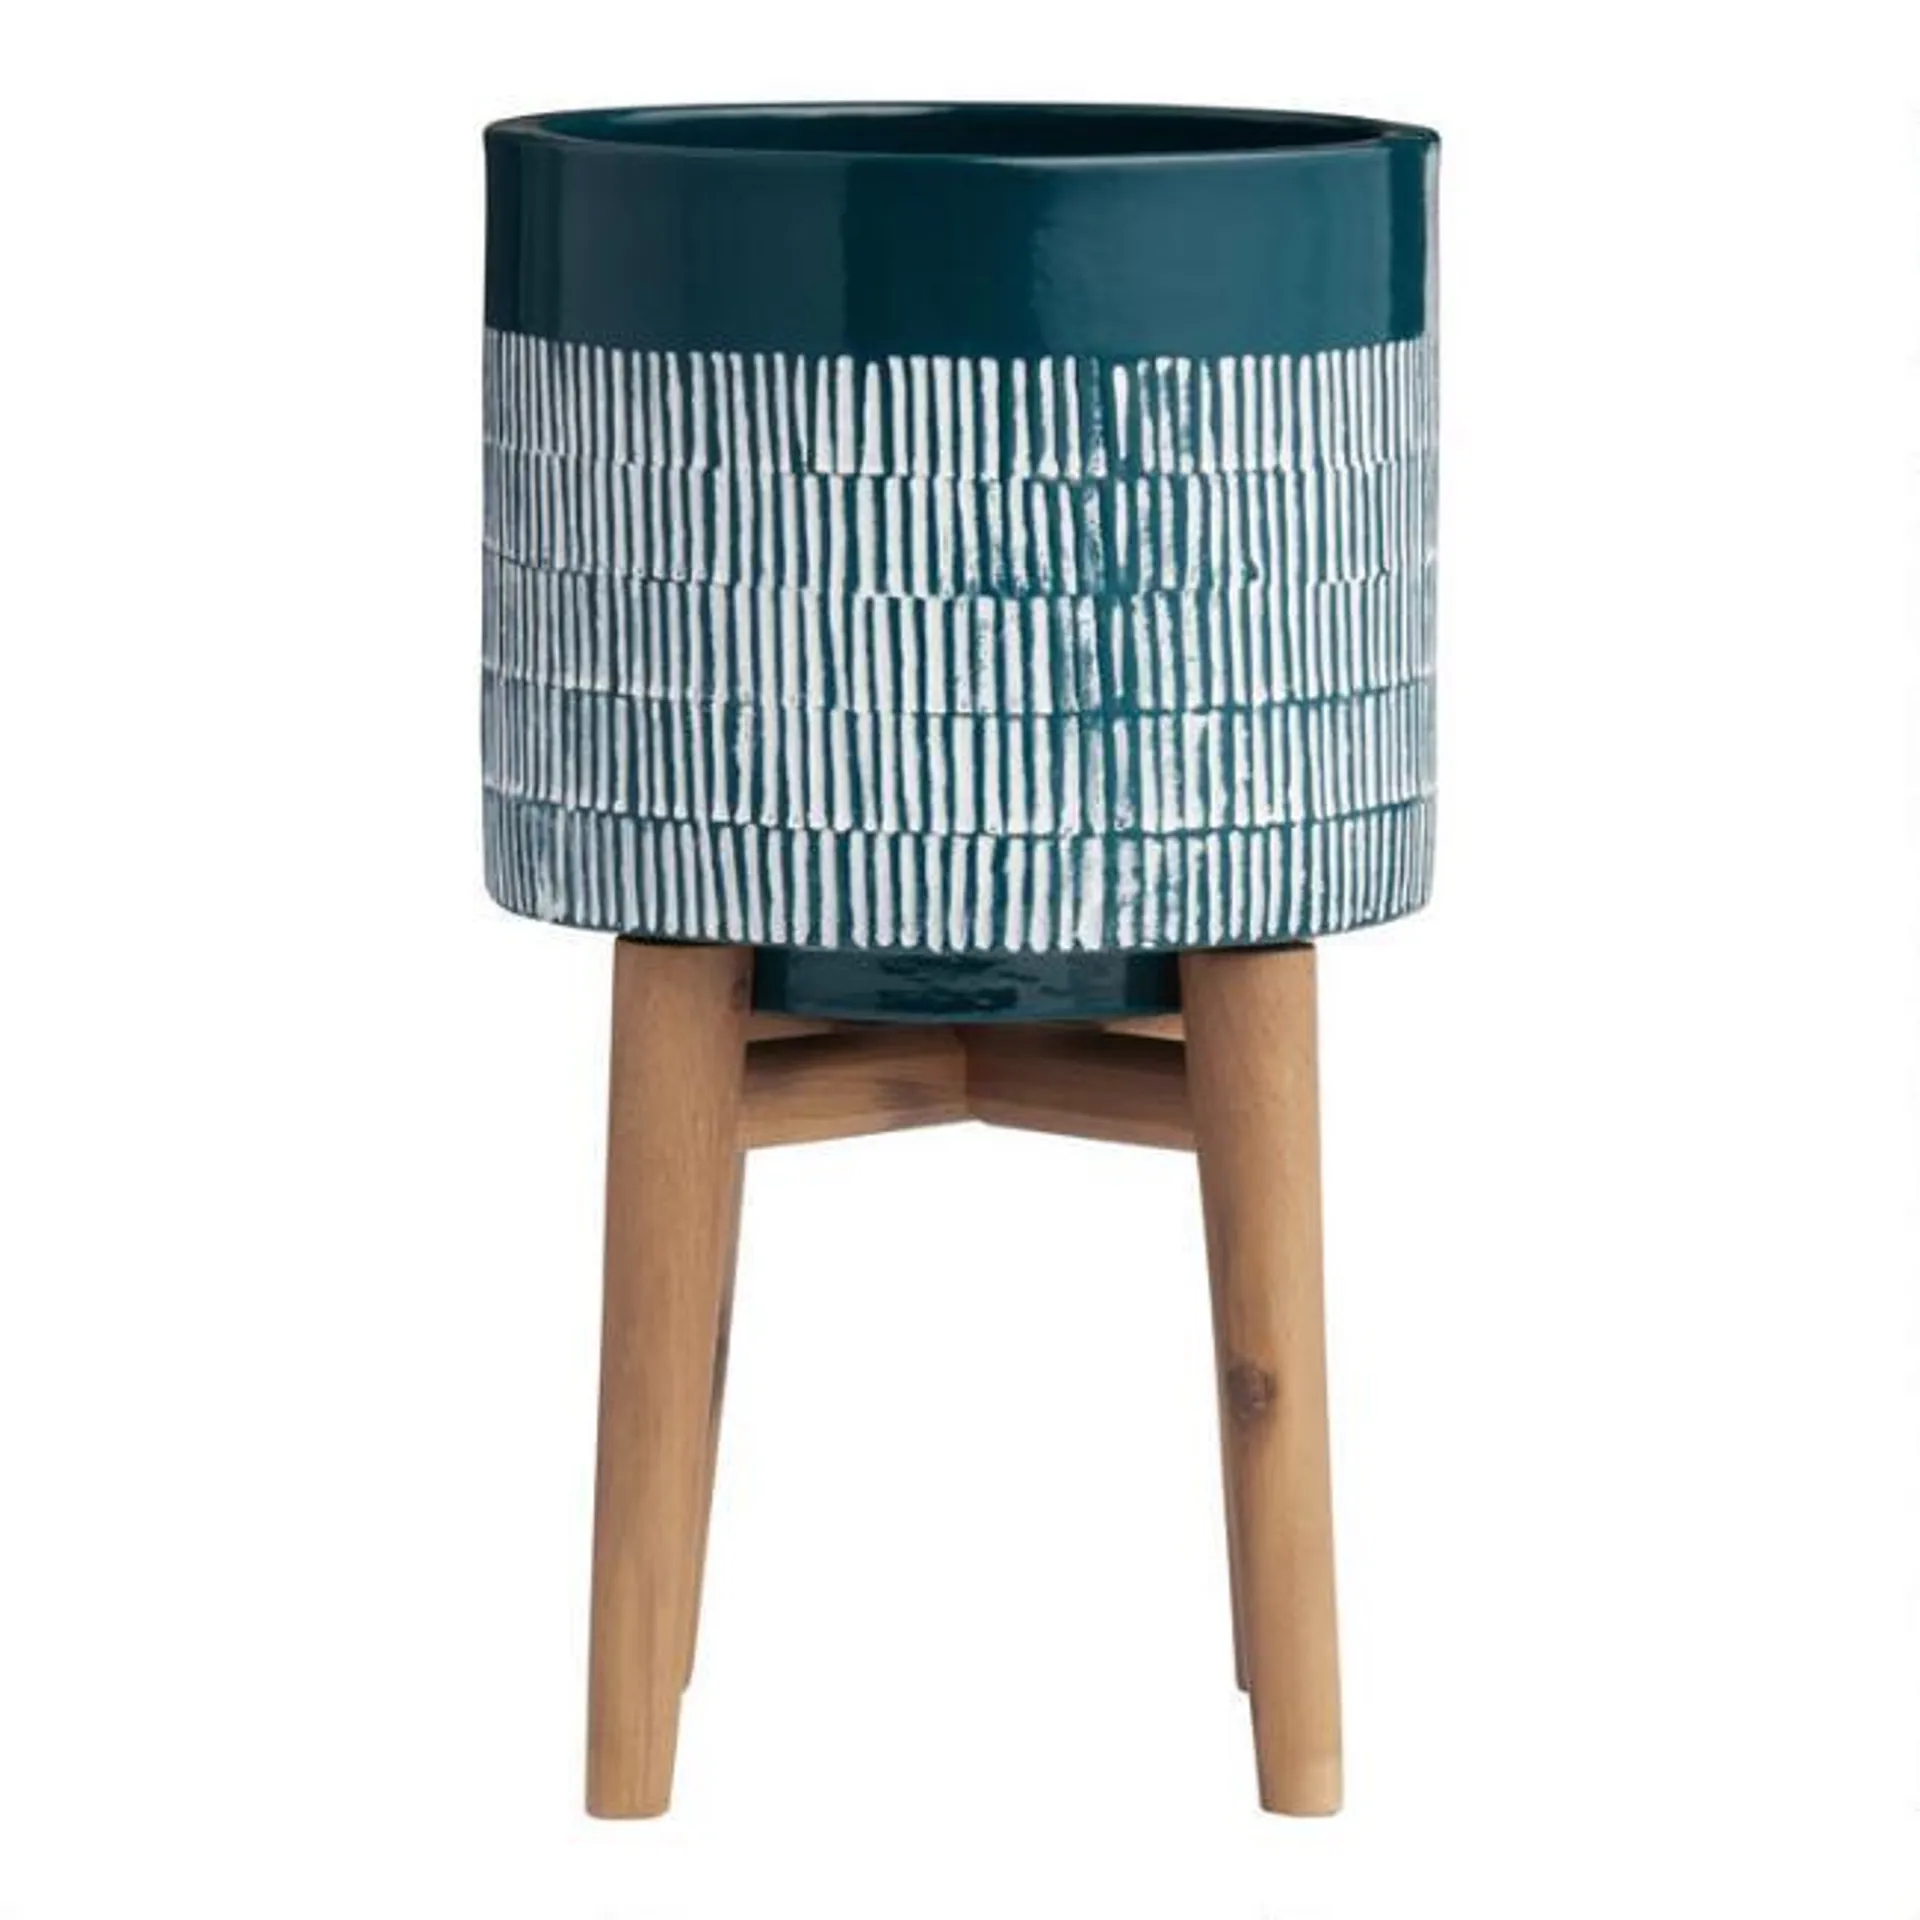 Dark Turquoise Ceramic Planter with Wood Stand